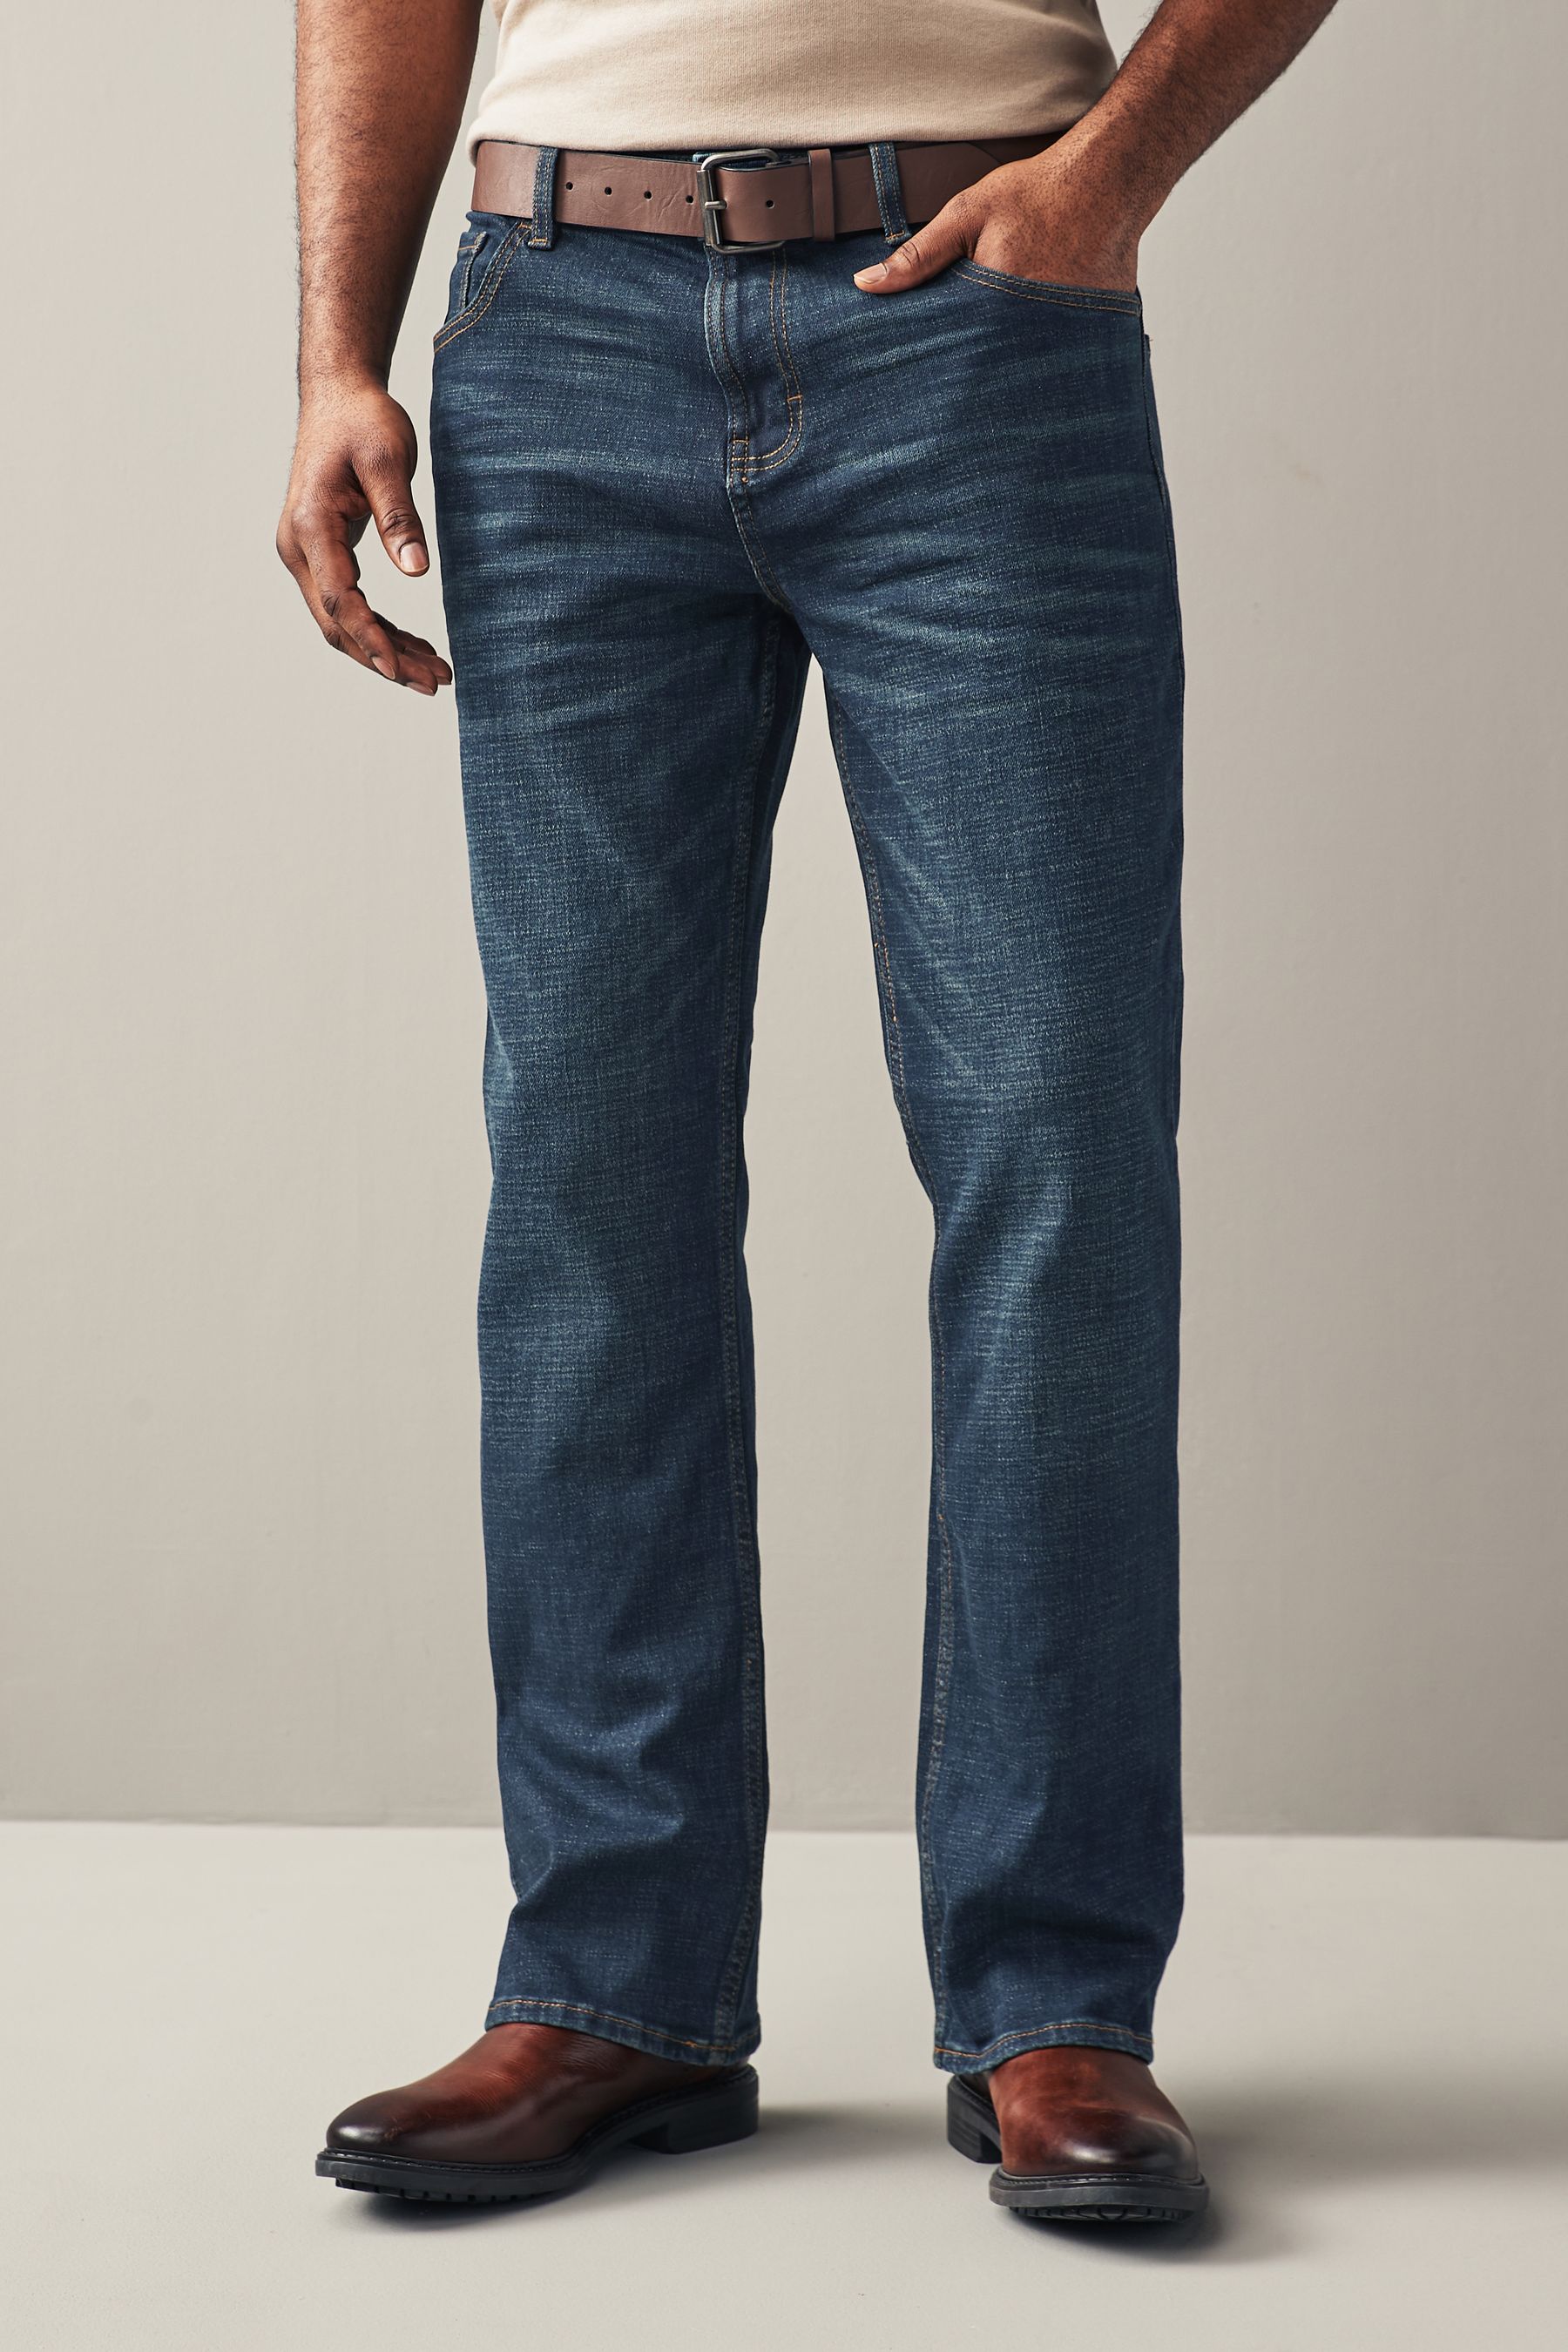 Buy Washed Blue Bootcut Belted Authentic Jeans from the Next UK online shop